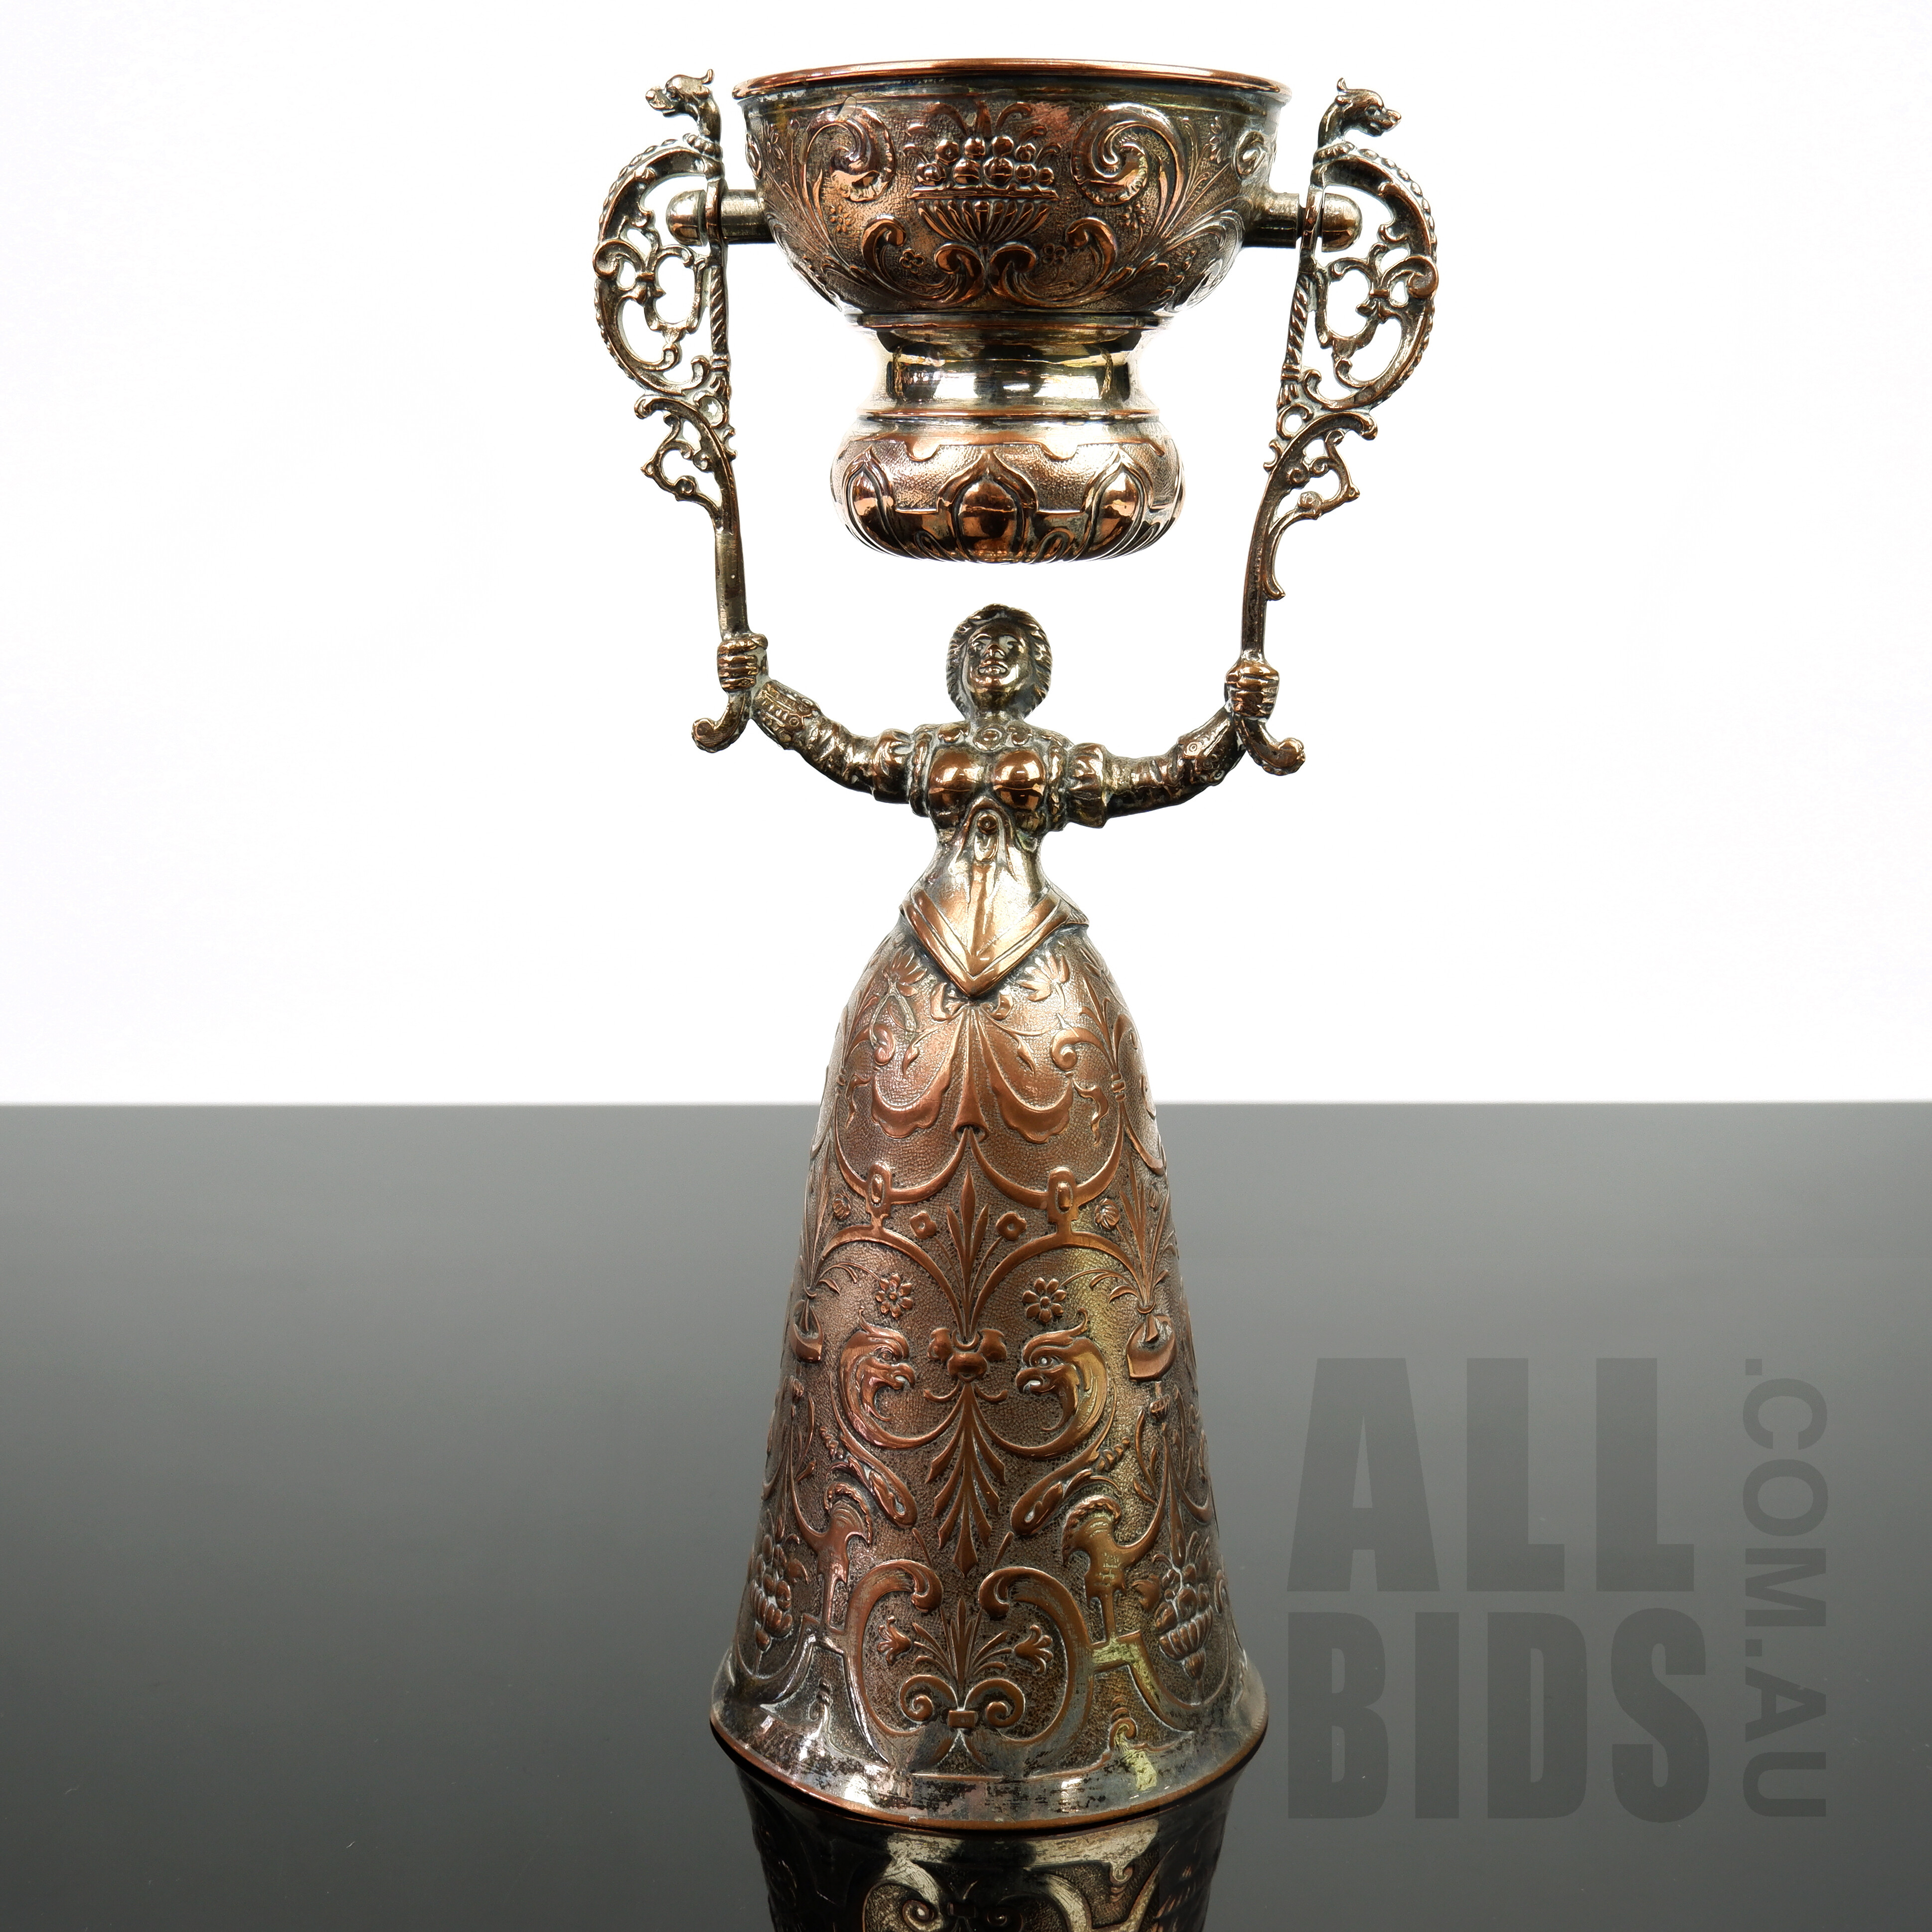 '19th Century Silver Plated Wager or Marriage Cup with Gimbal Bowl'